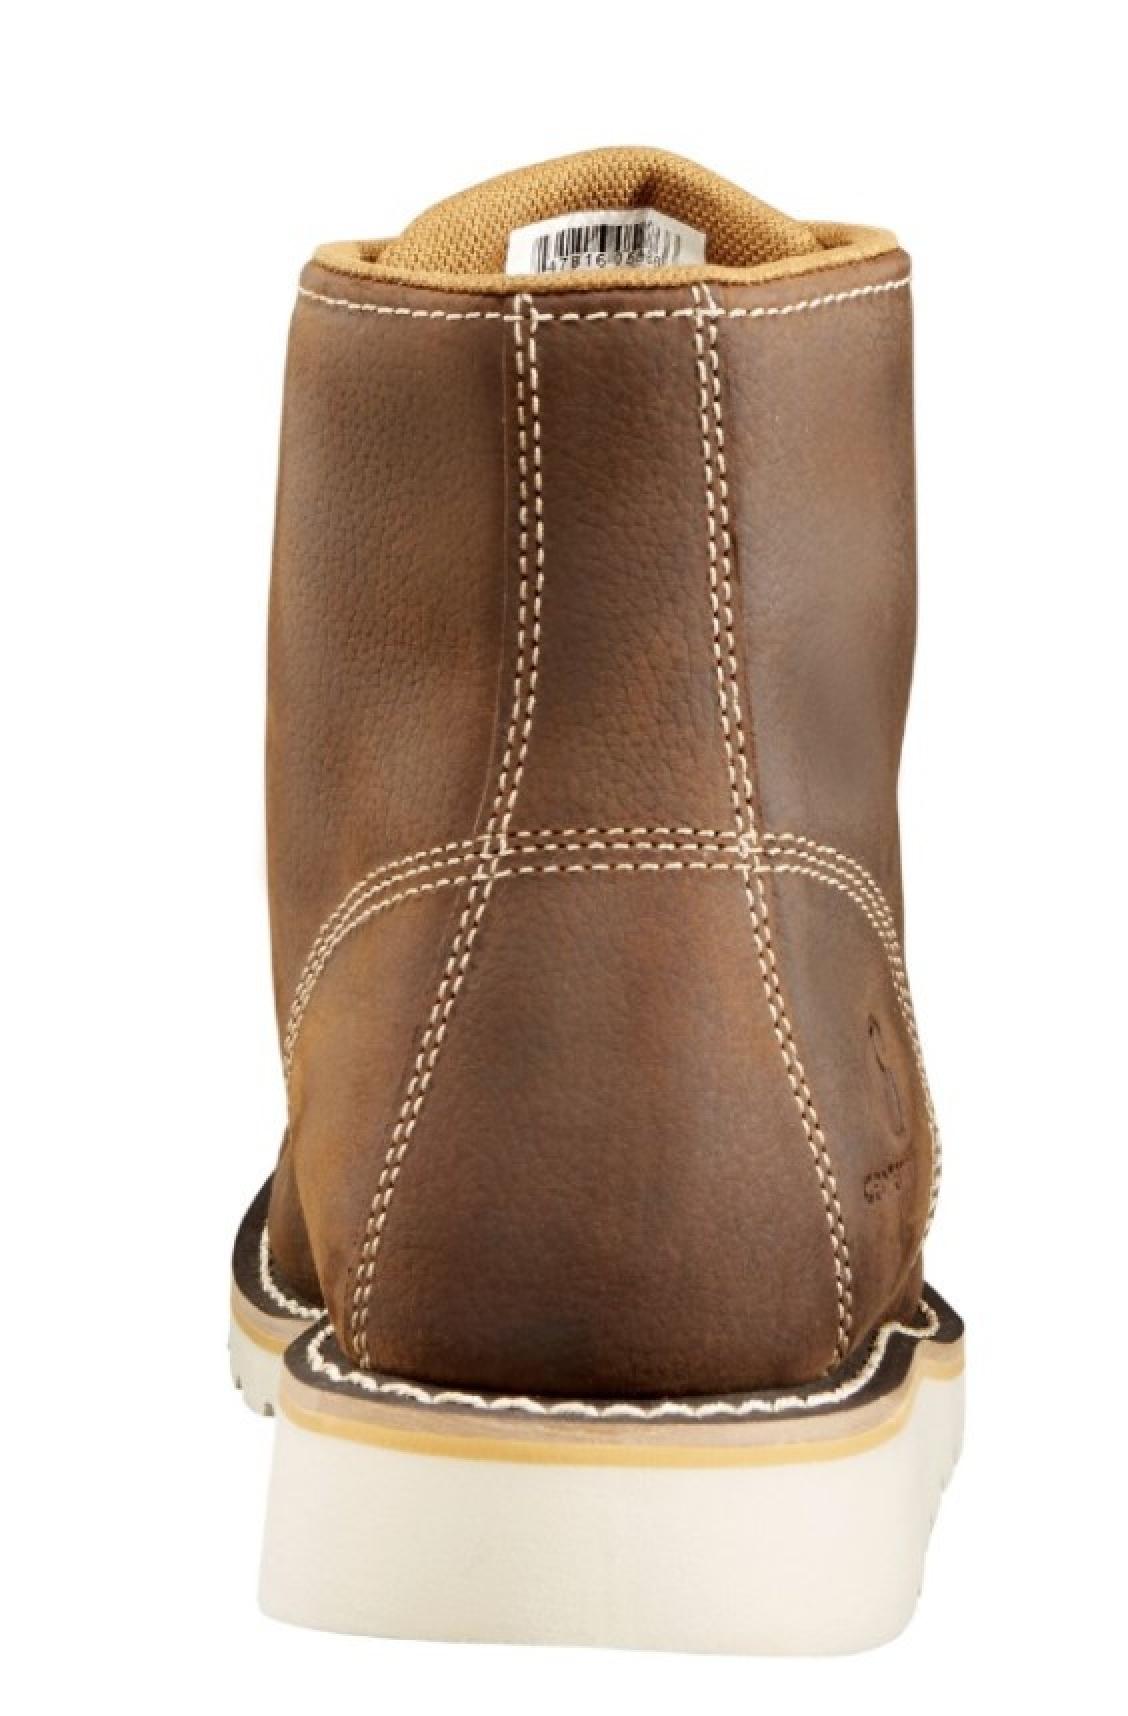 Carhartt 6-Inch Non-Safety Toe Wedge Boot Back View